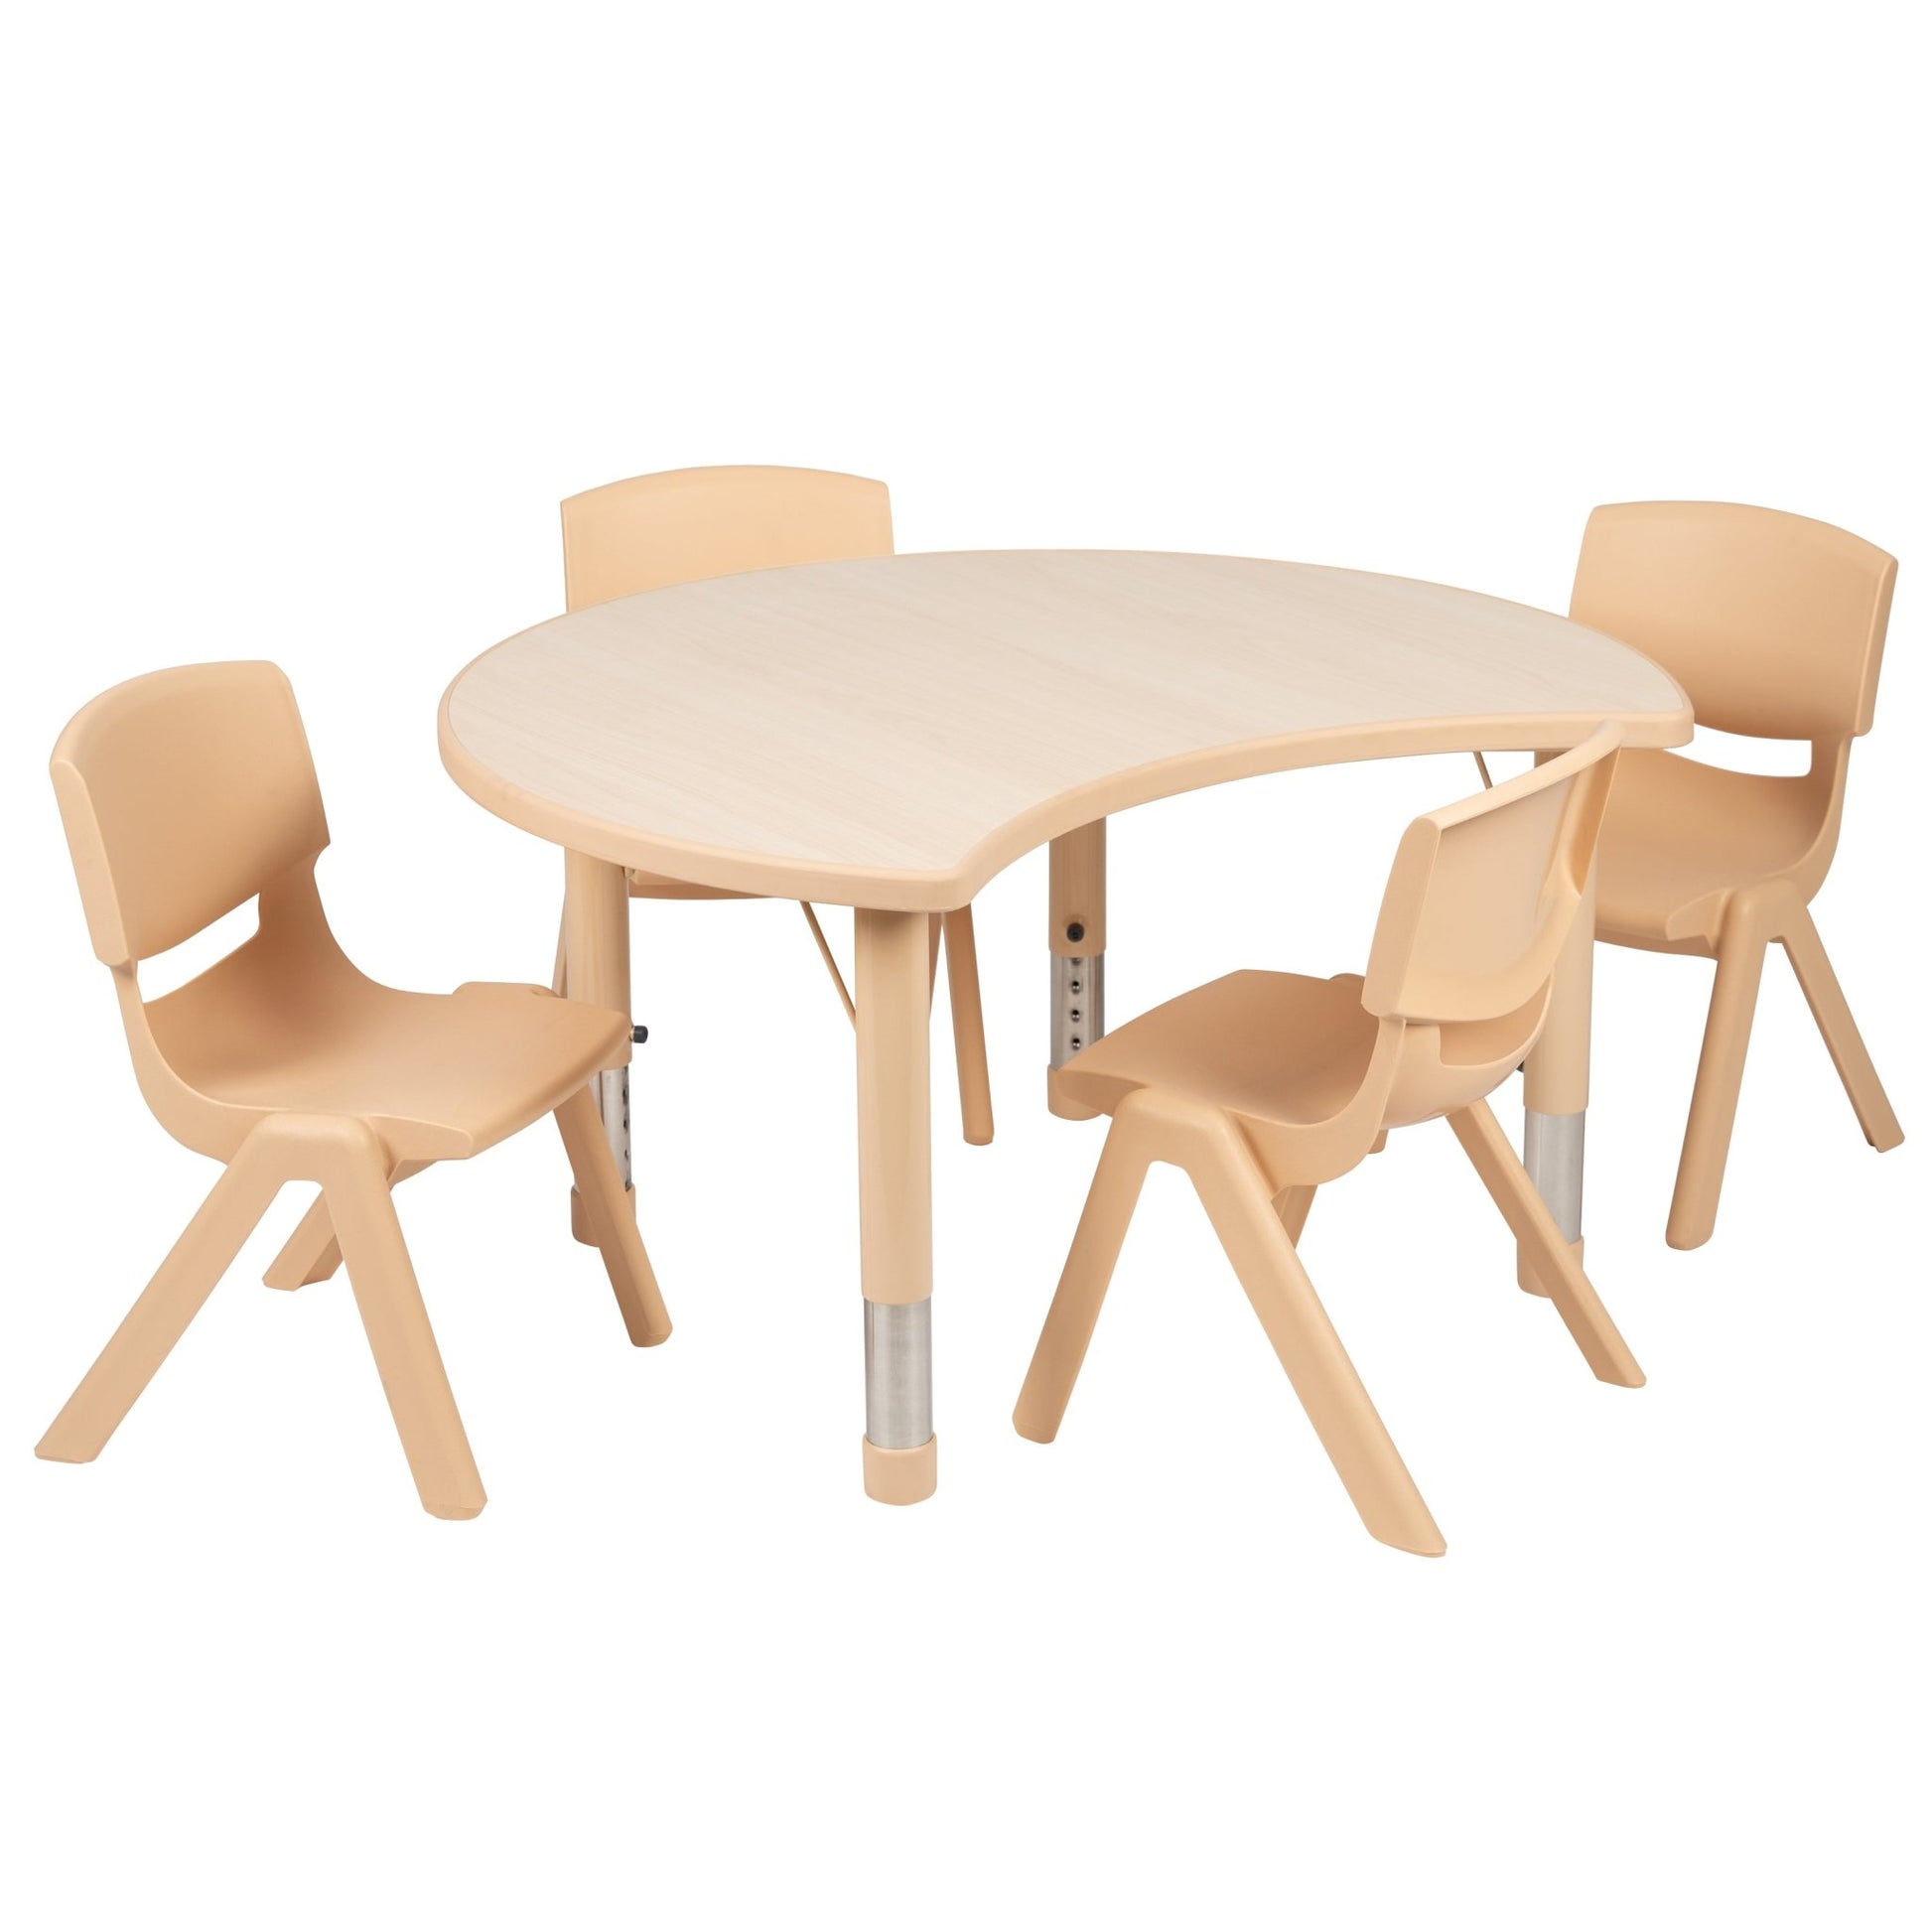 Emmy 25.125"W x 35.5"L Crescent Natural Plastic Height Adjustable Activity Table Set with 4 Chairs - SchoolOutlet